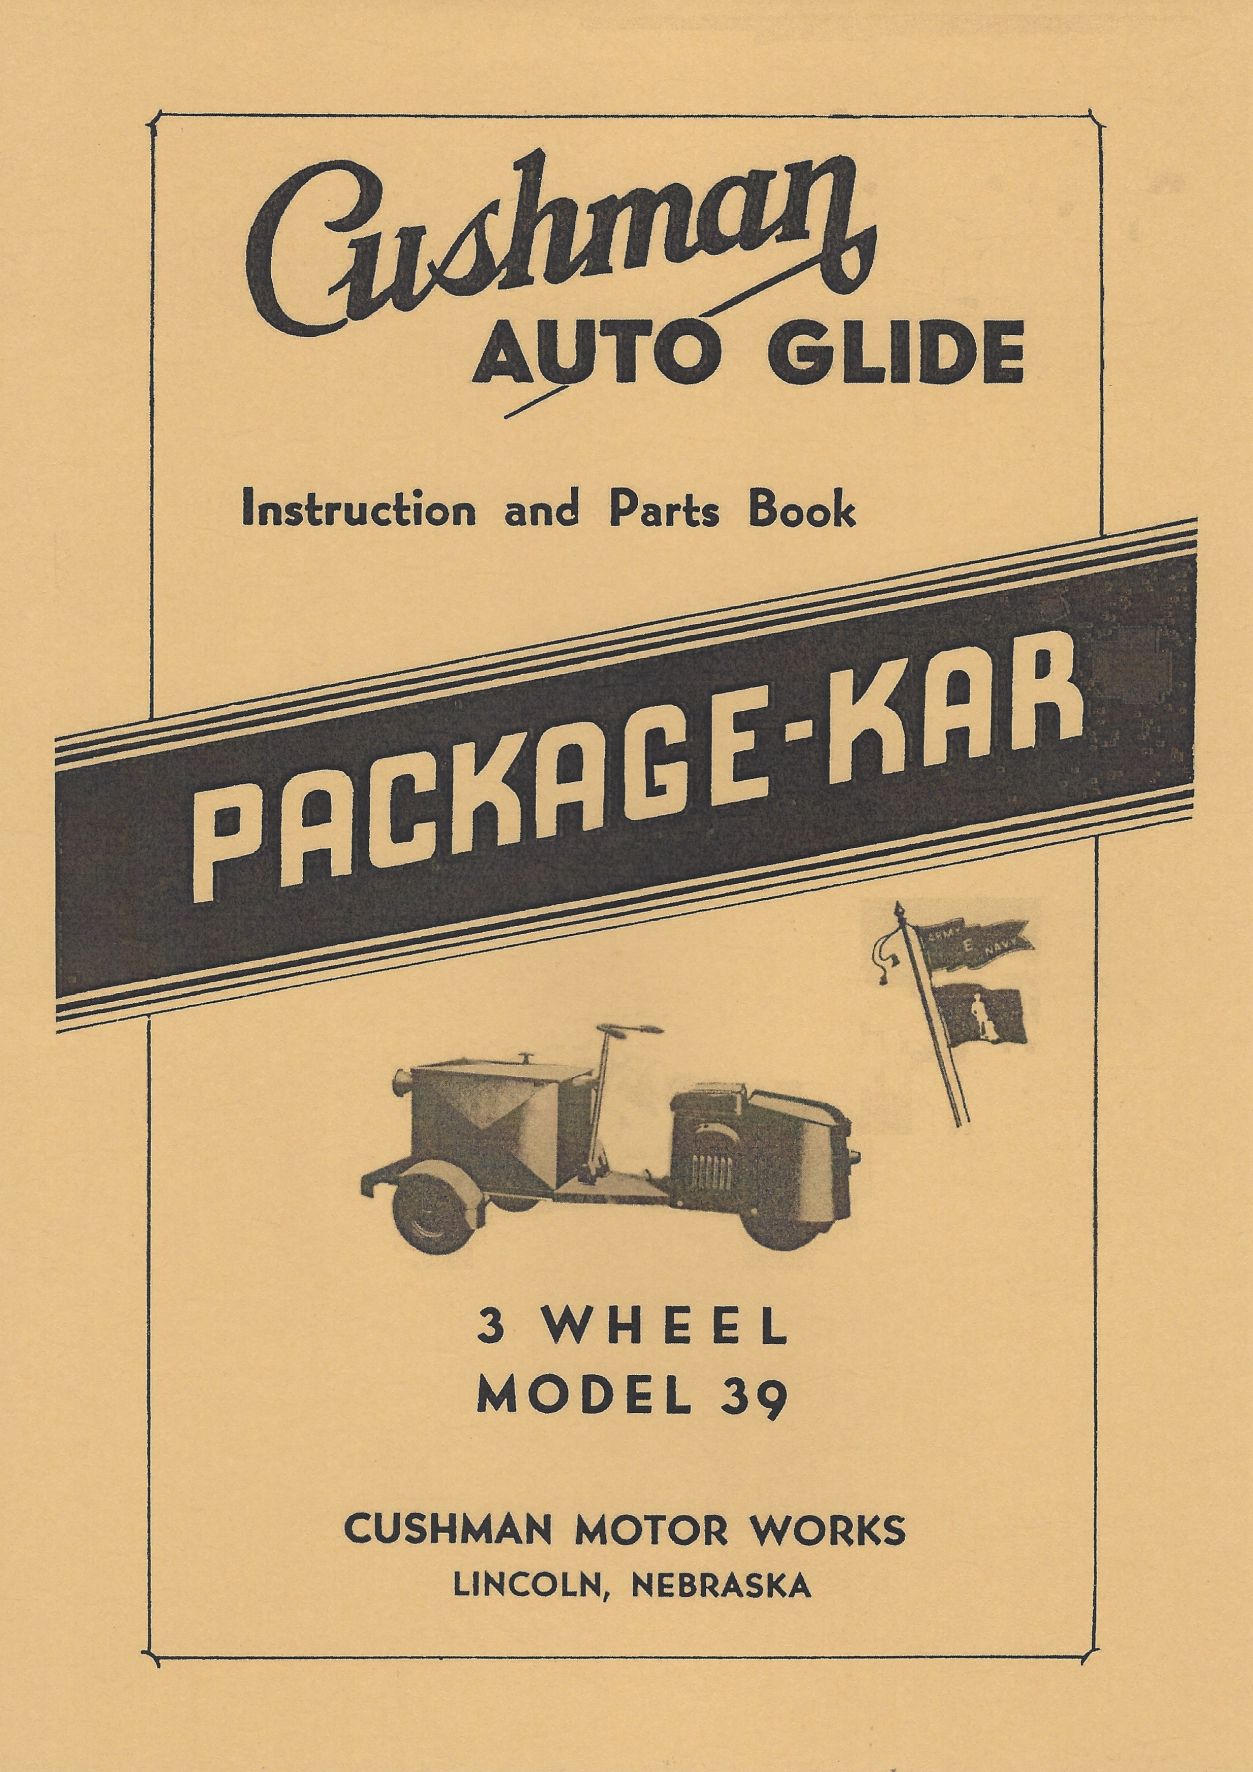 CUSHMAN AUTO GLIDE PACKAGE-KAR 3 WHEEL MODEL 39 INSTRUCTION AND PARTS BOOK